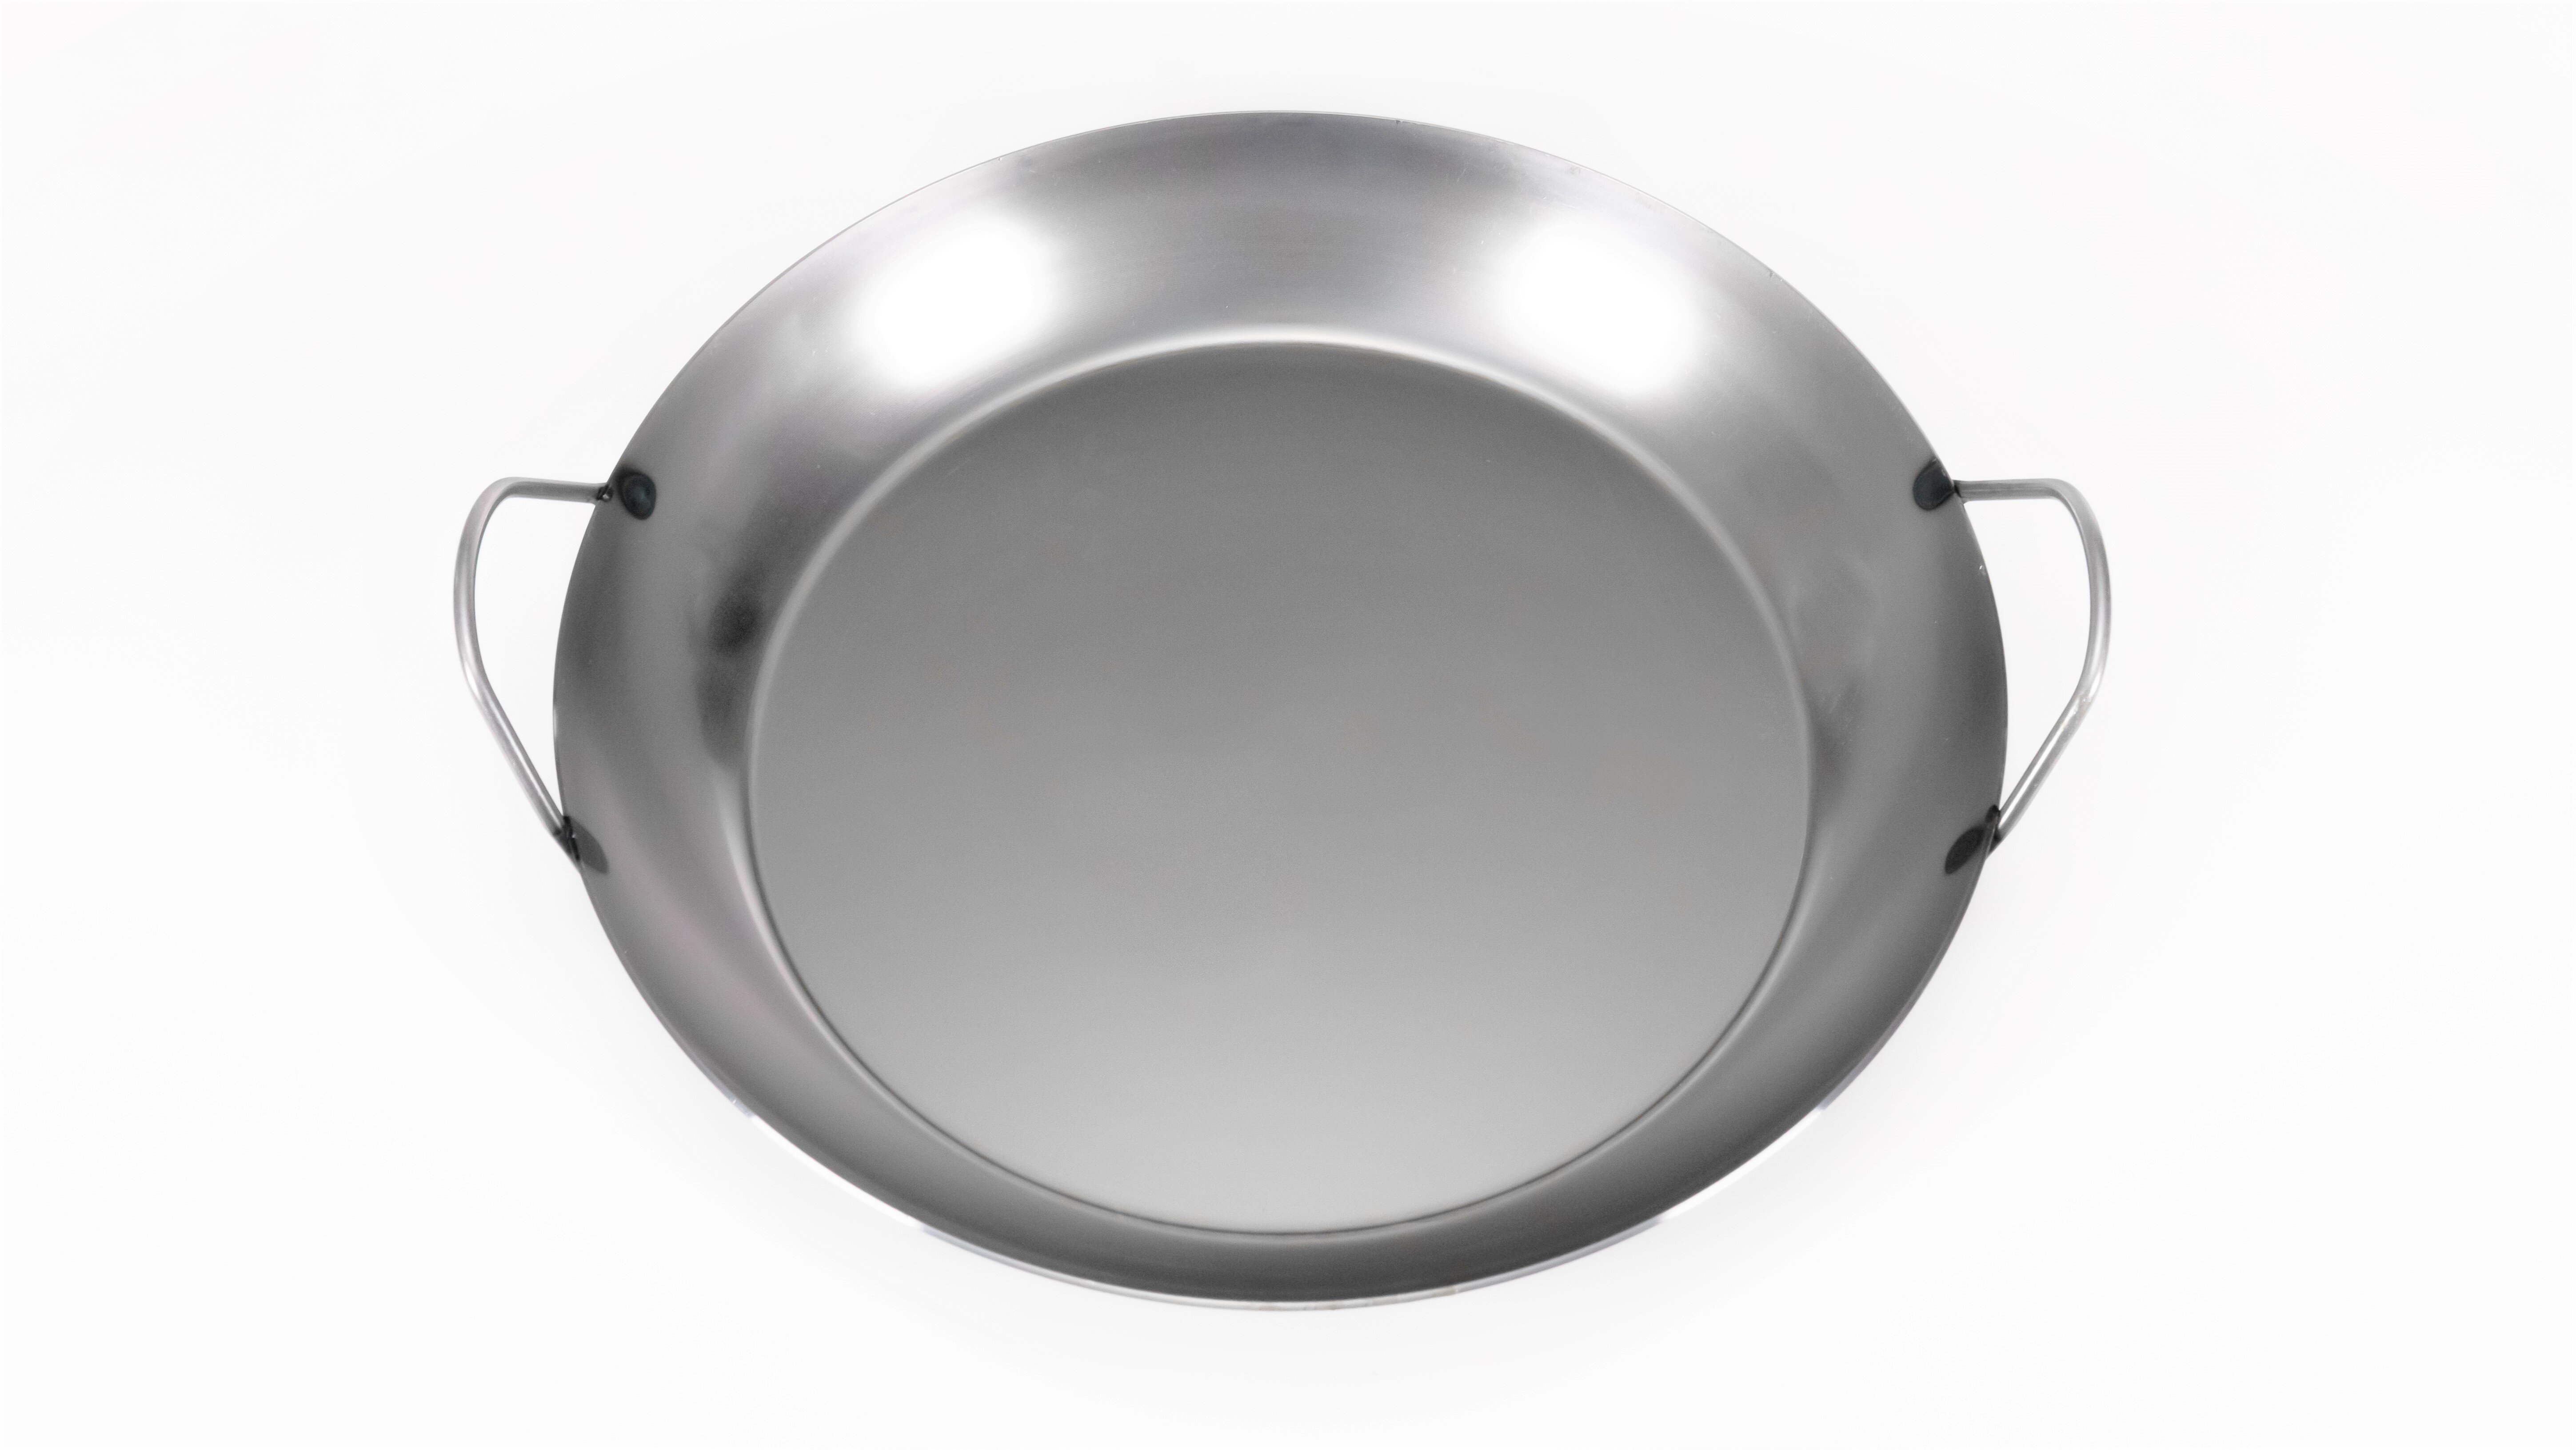 Matfer Bourgeat Paella Carbon Steel Non Stick Specialty Pan